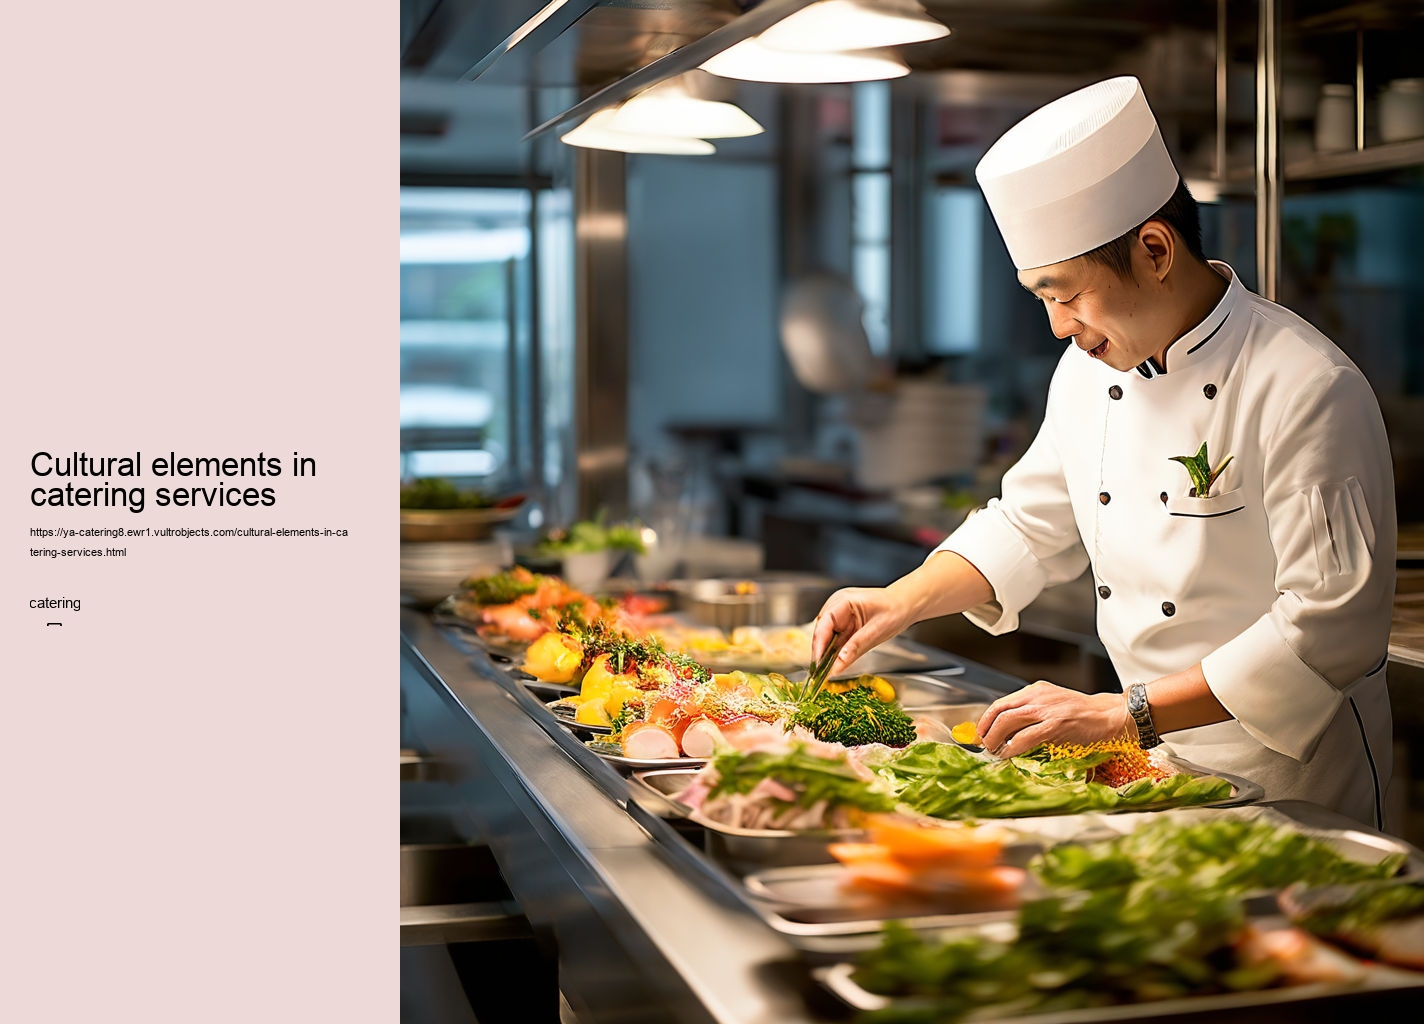 Cultural elements in catering services